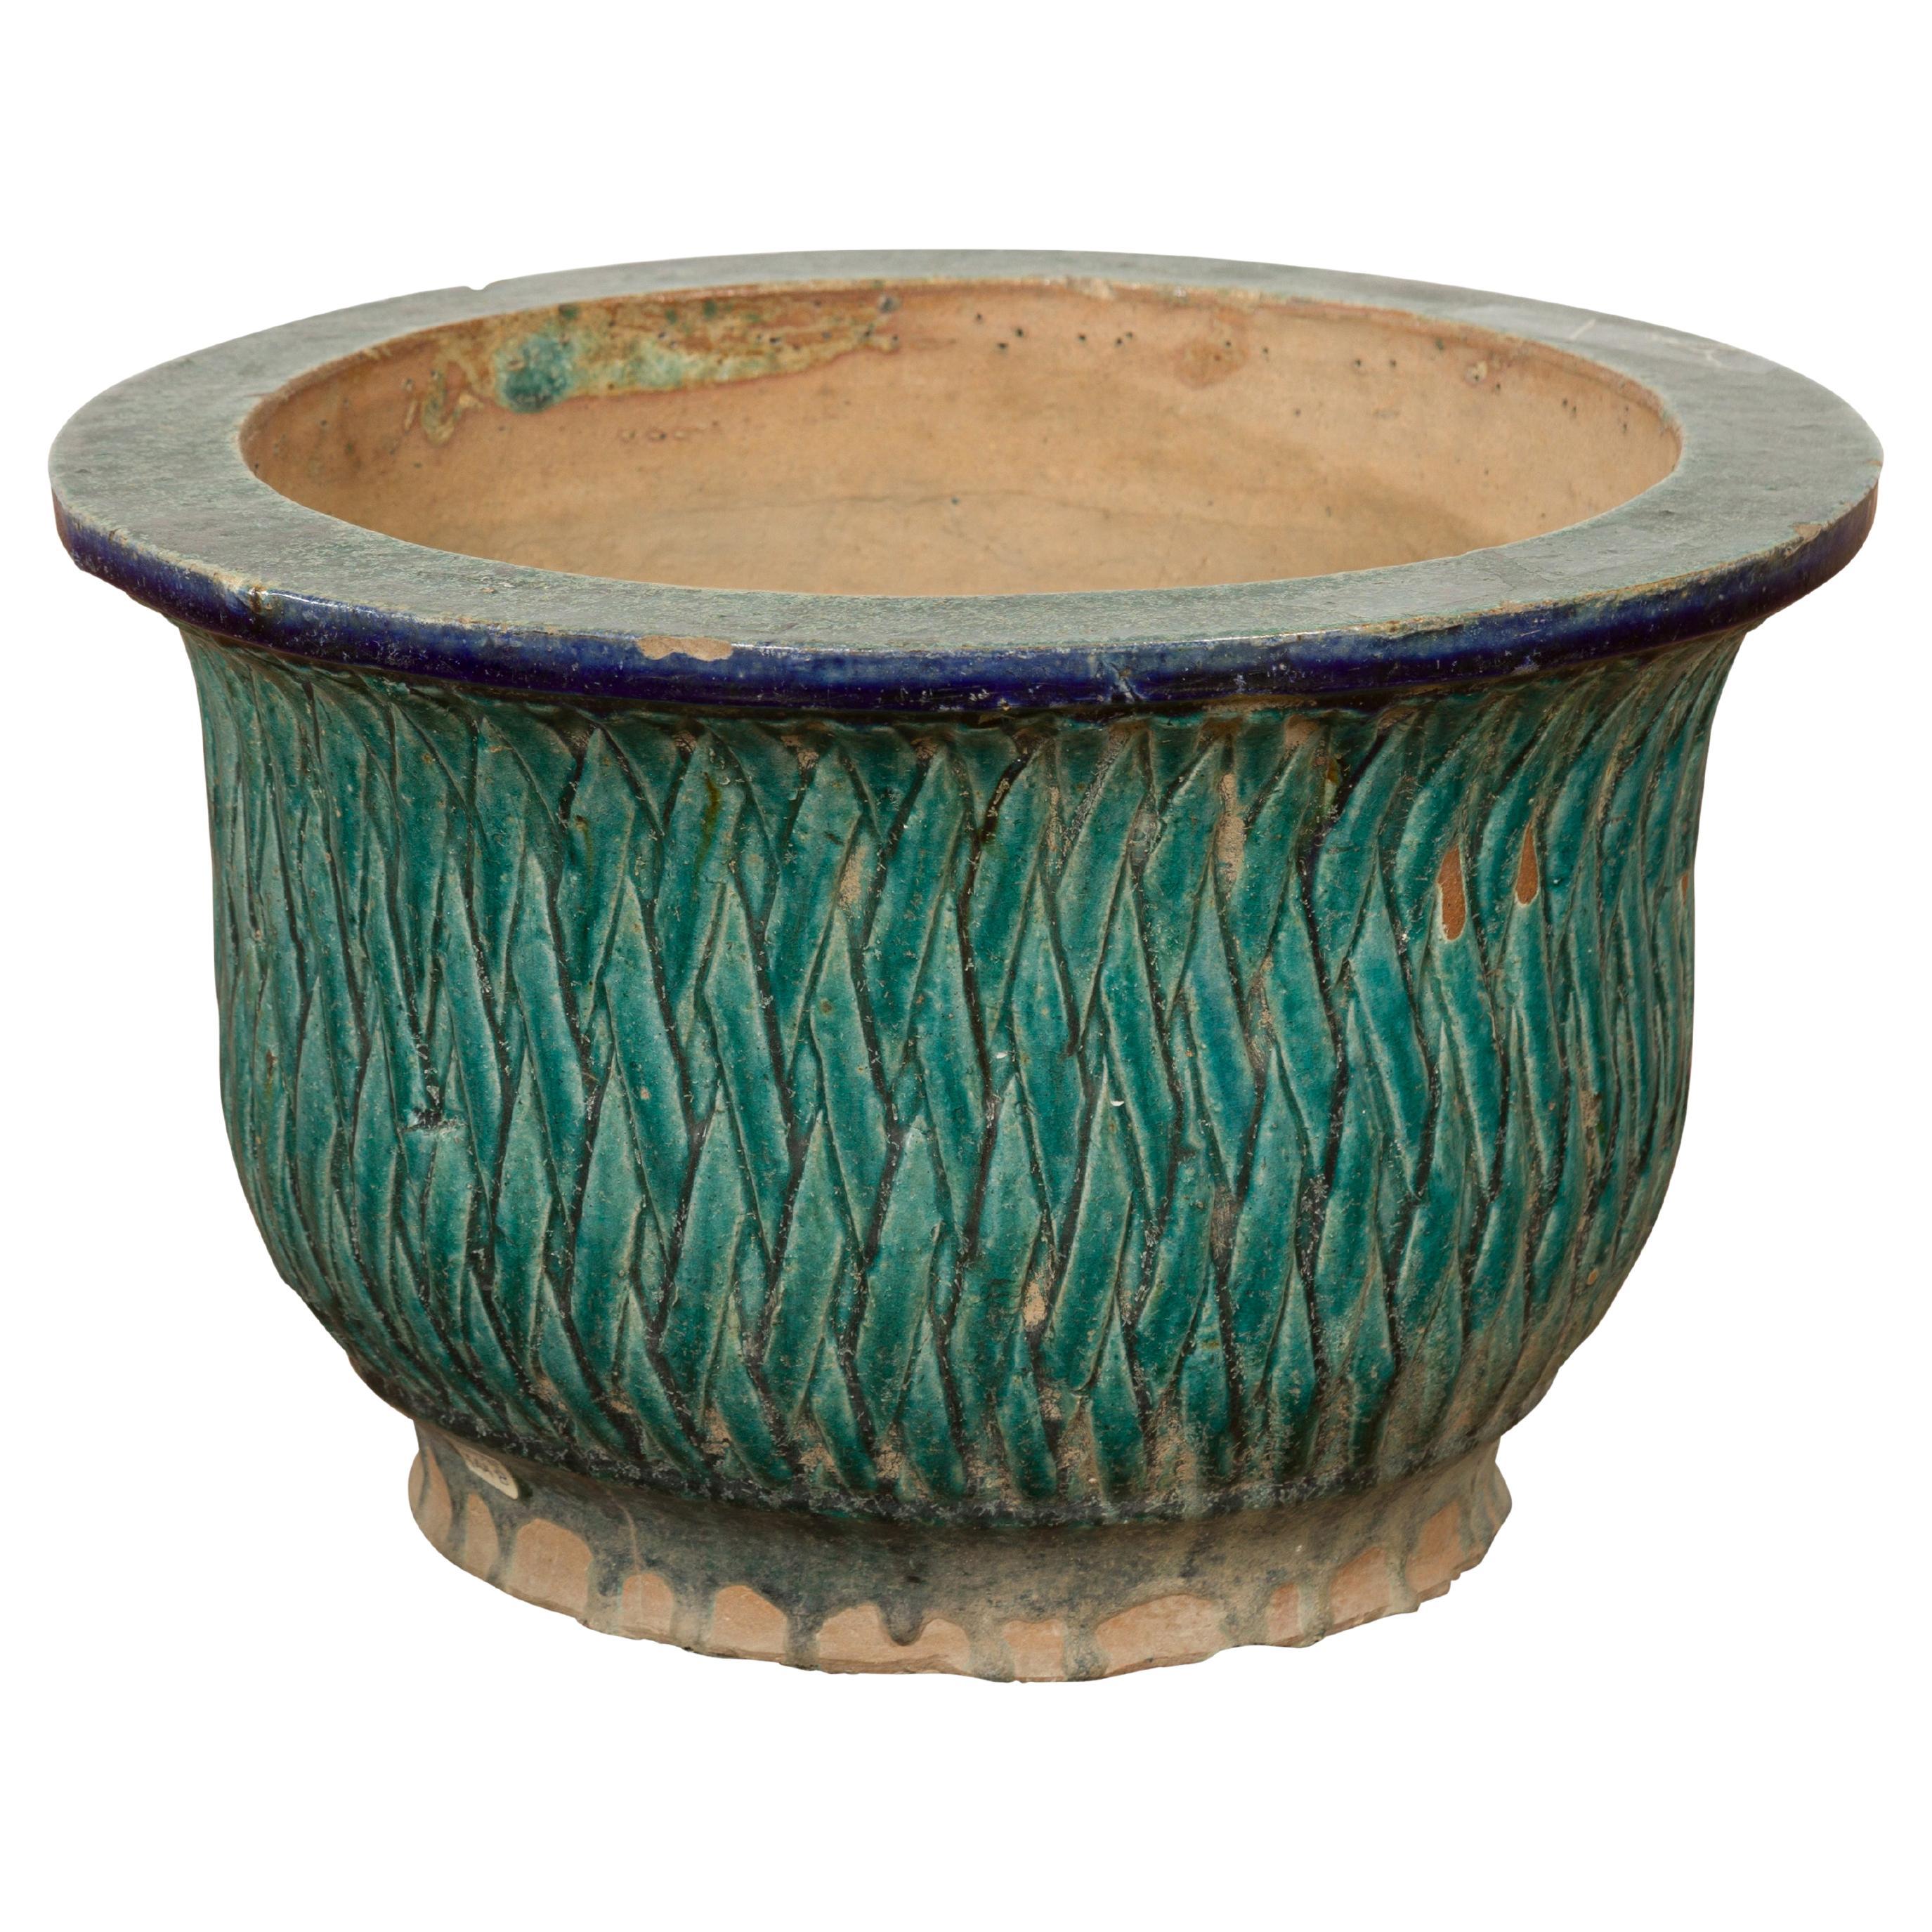 Multi-Glaze Planter with Green and Blue Accents, Qing Dynasty Period For Sale